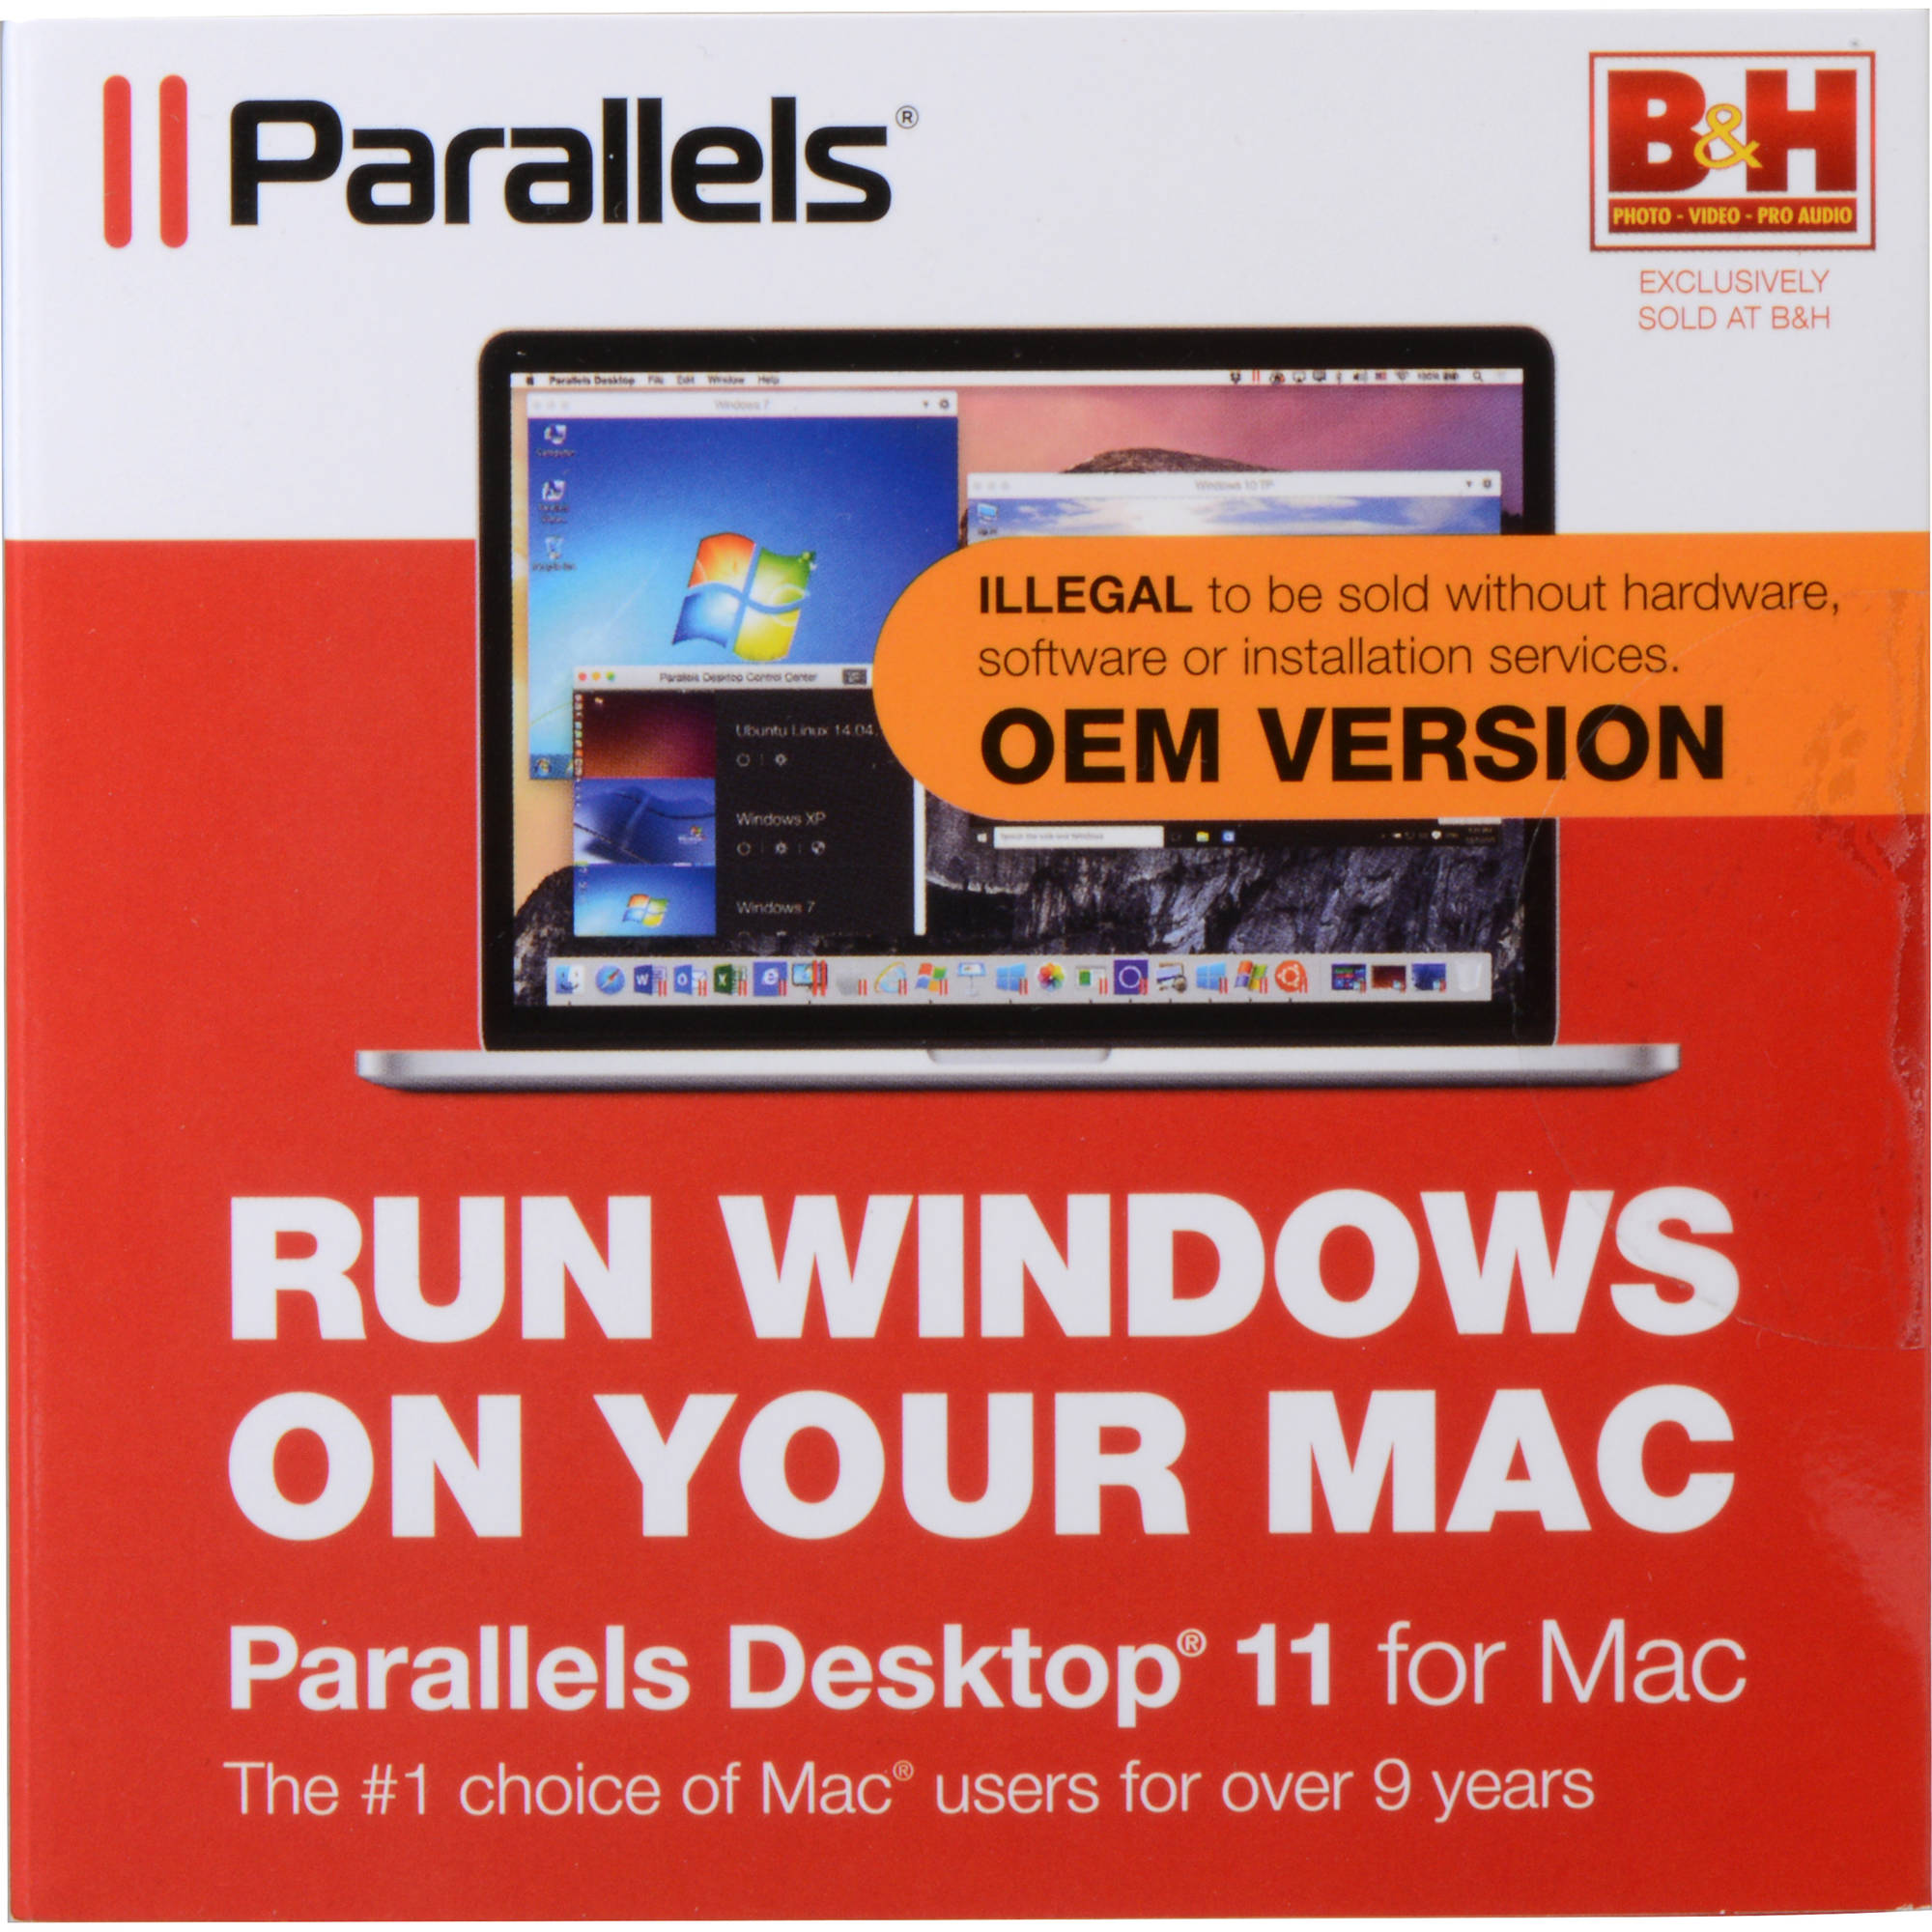 upgrade windows xp to windows 7 on parallels for mac